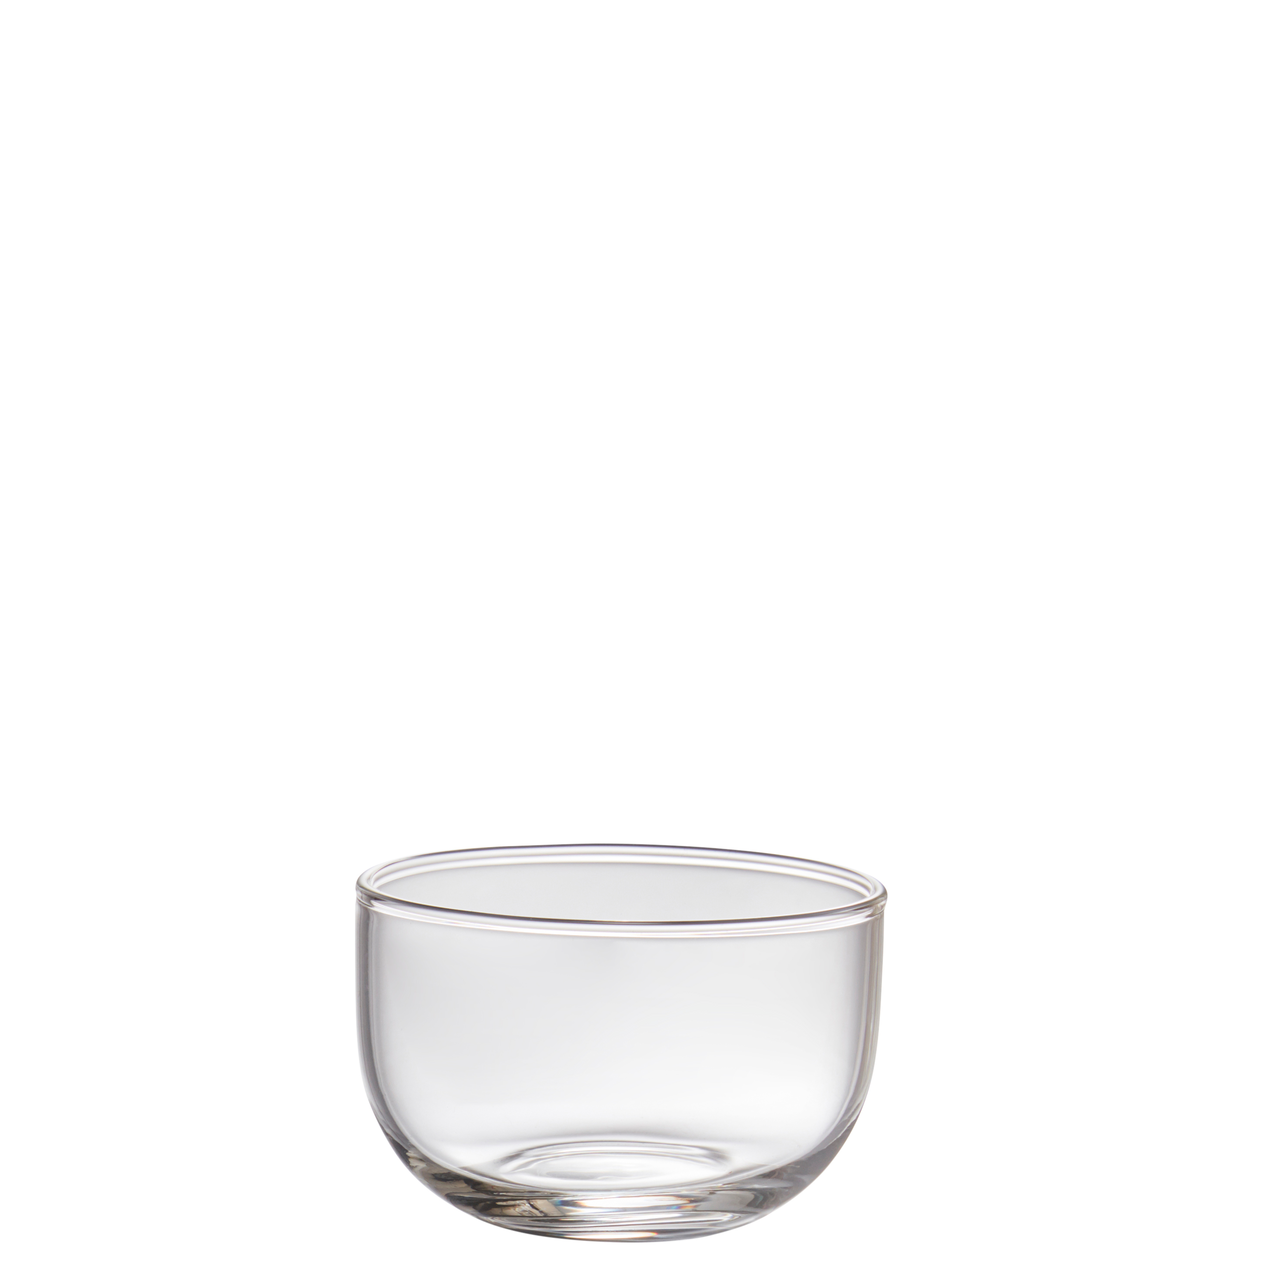 Cup glass 80ml clear